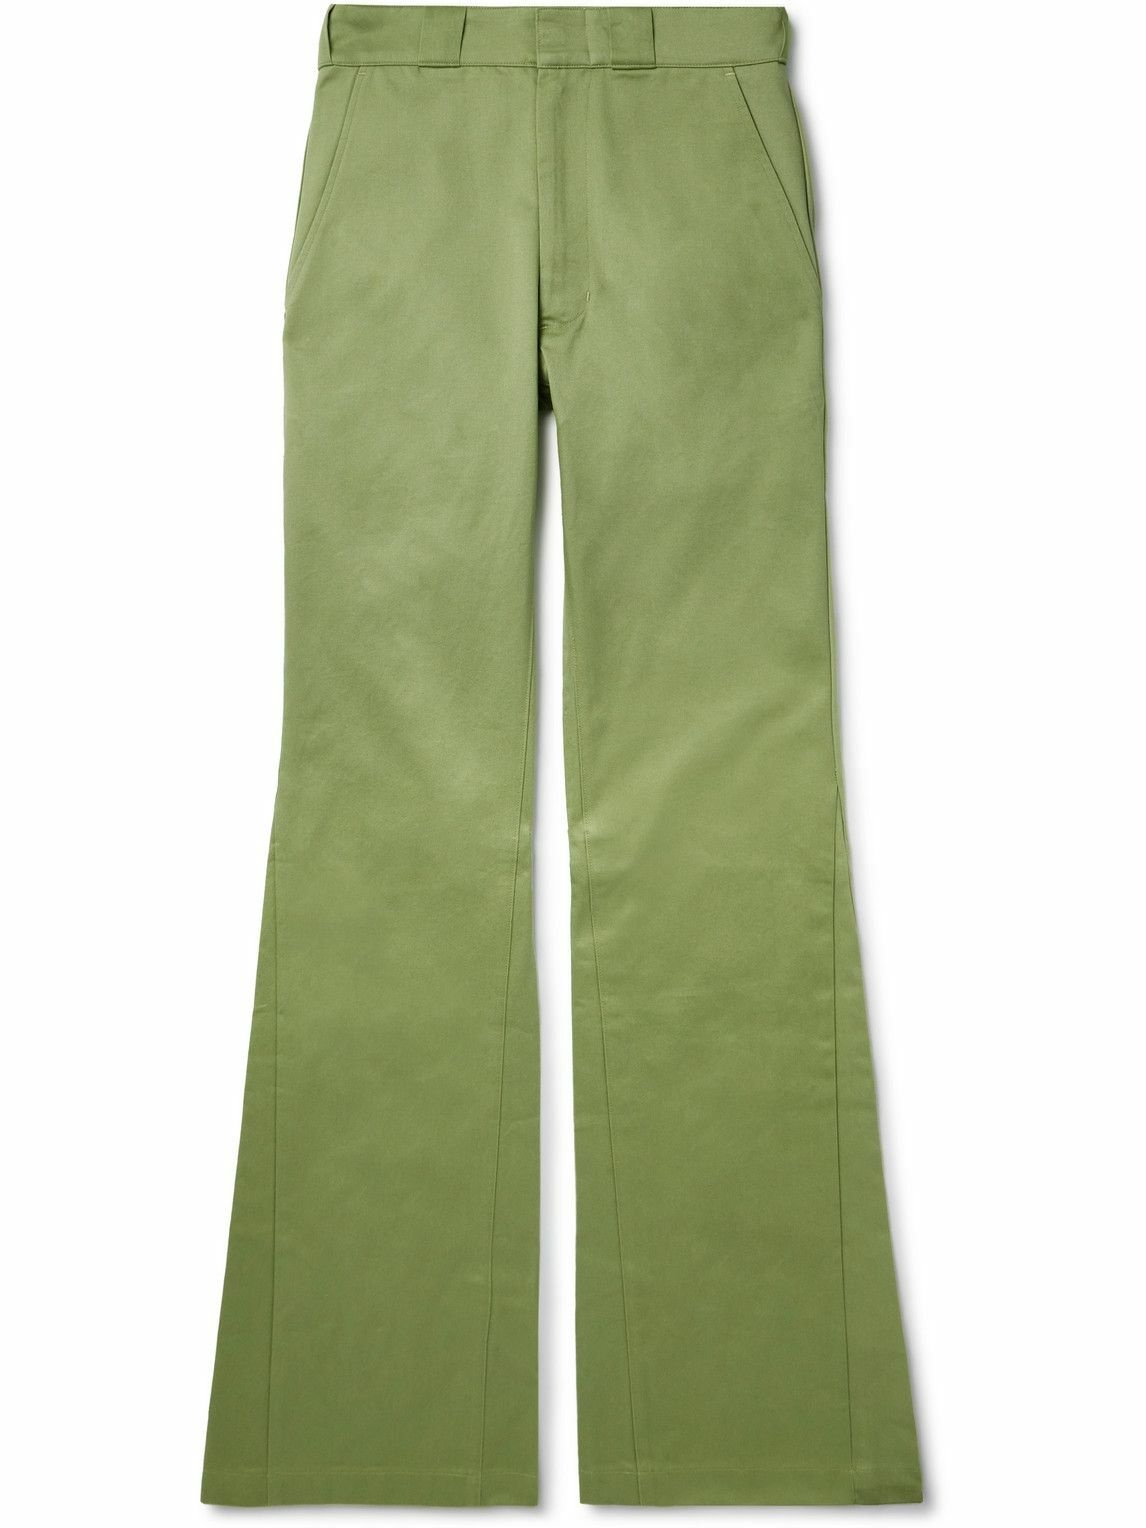 Gallery Dept. - Bootcut Cotton-Twill Chinos - Green Gallery Dept.